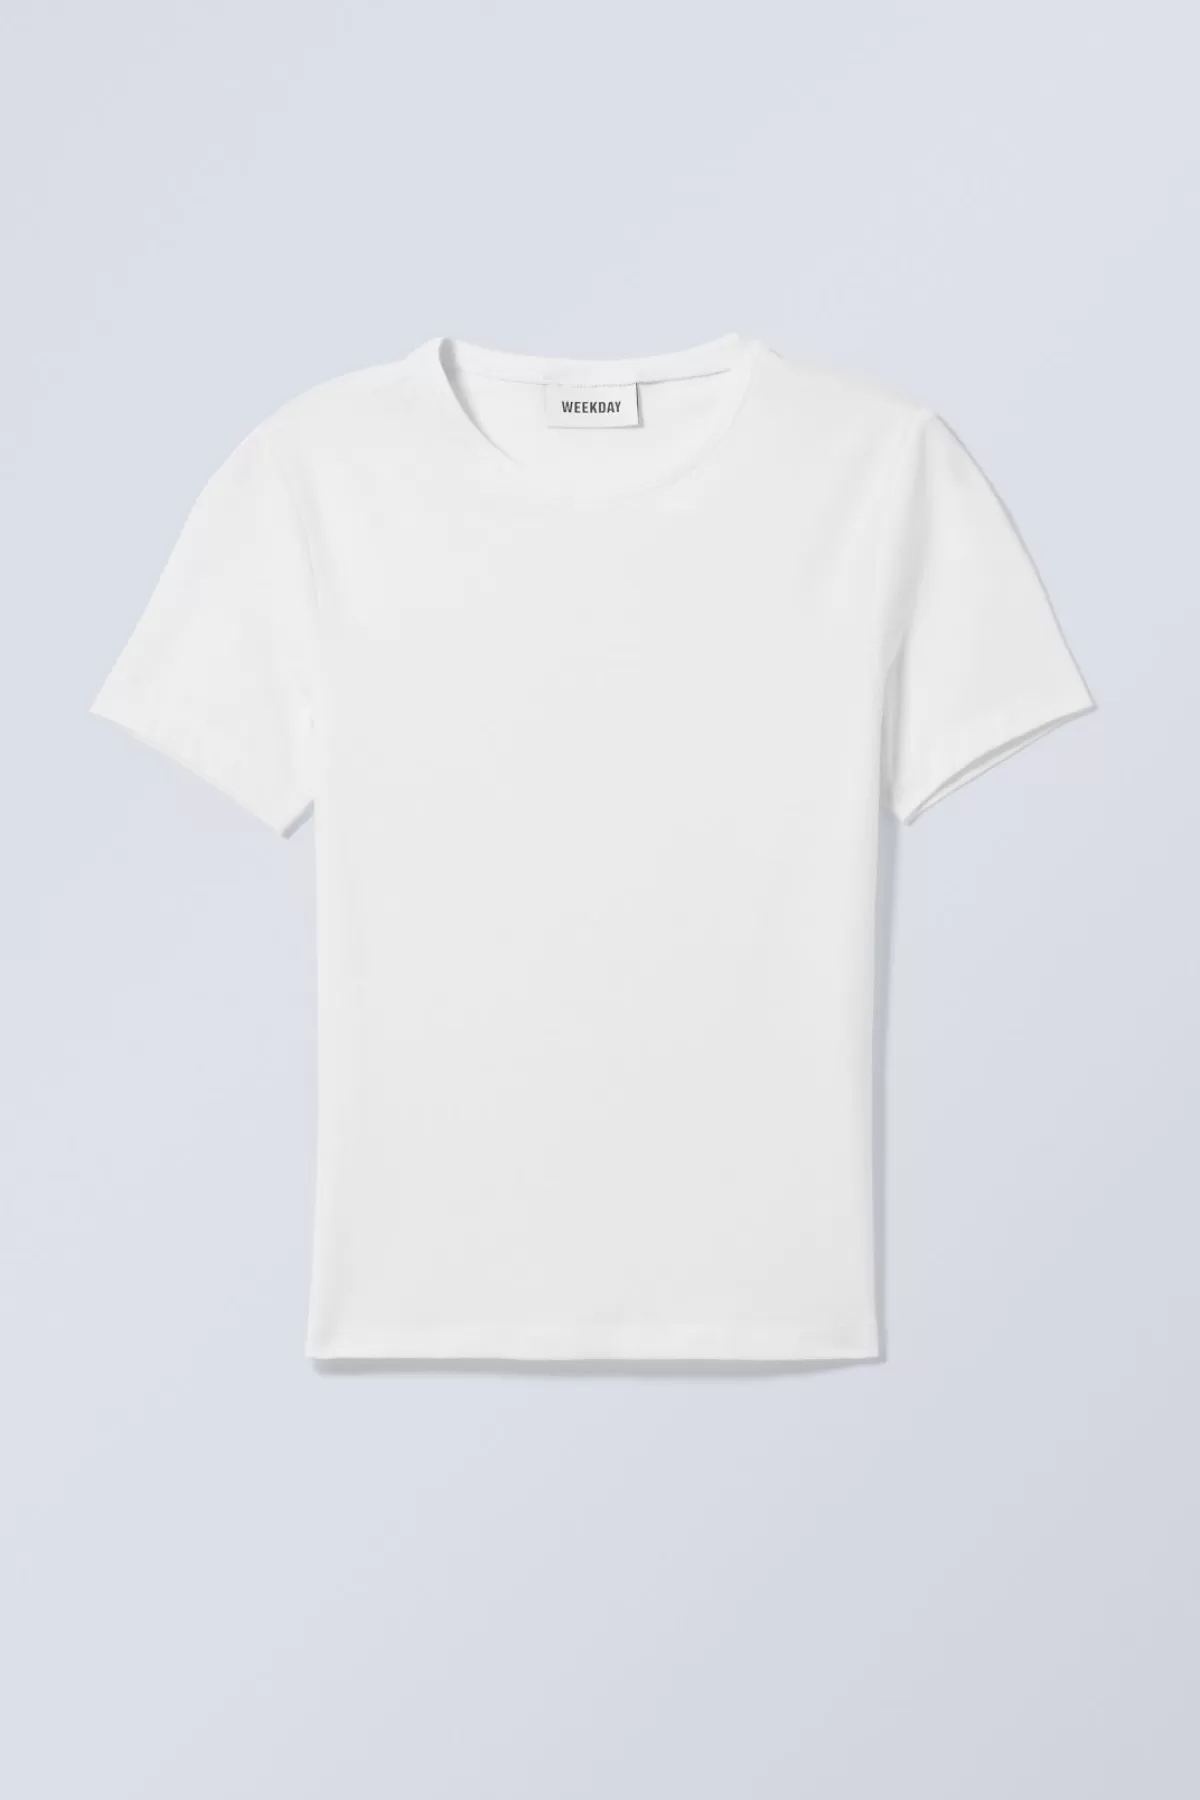 Weekday Slim Fitted T- shirt Store